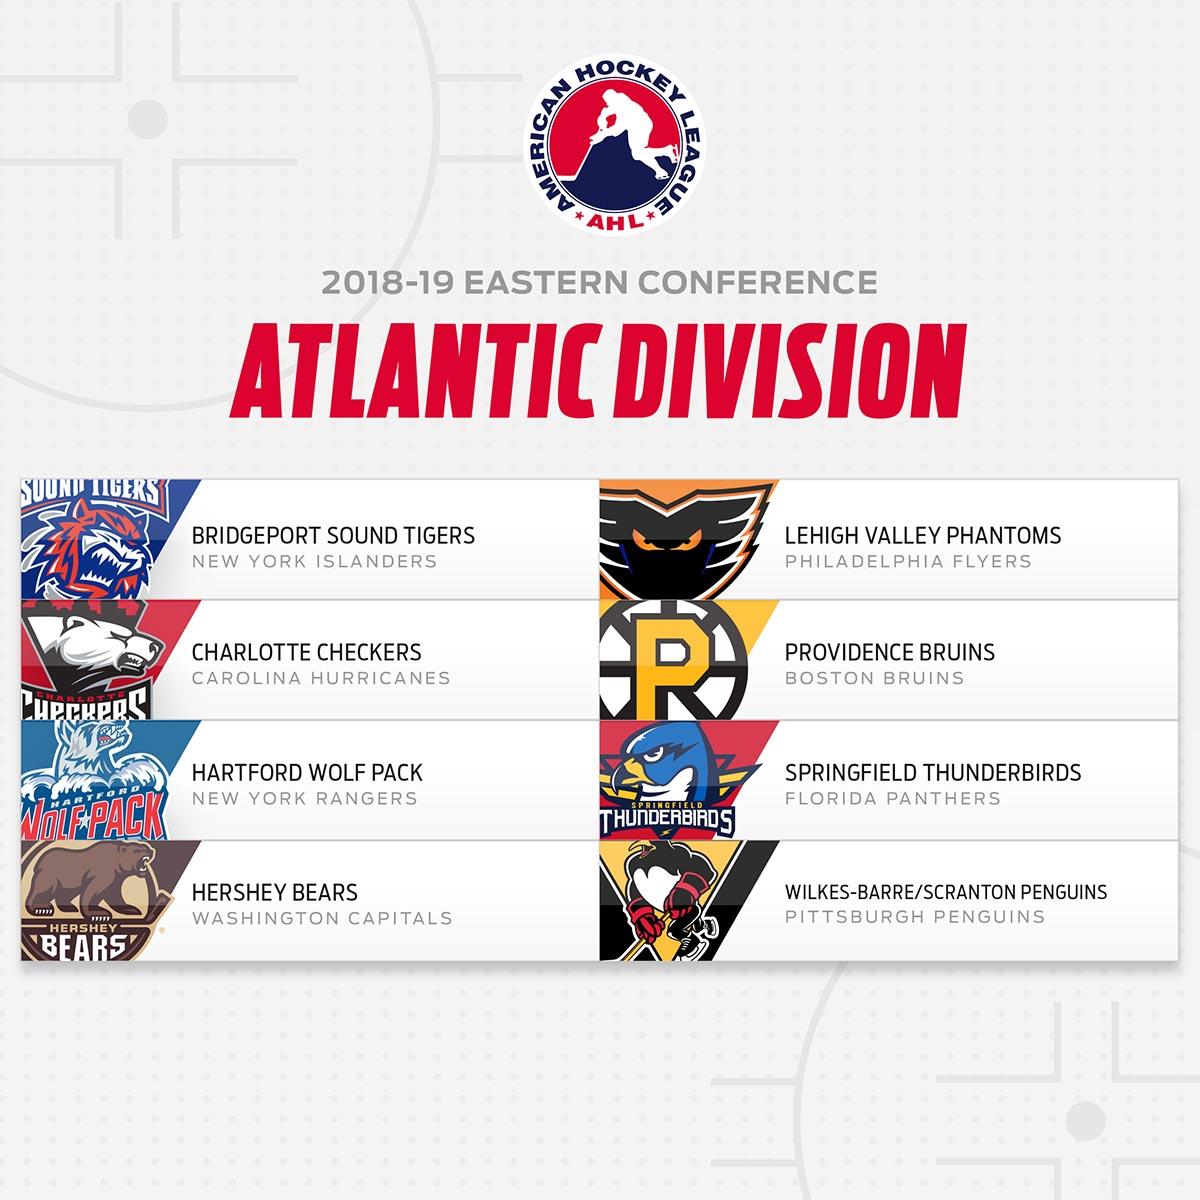 Current 2018 NHL Logo - 2018 19 AHL Alignment Announced. TheAHL.com. The American Hockey